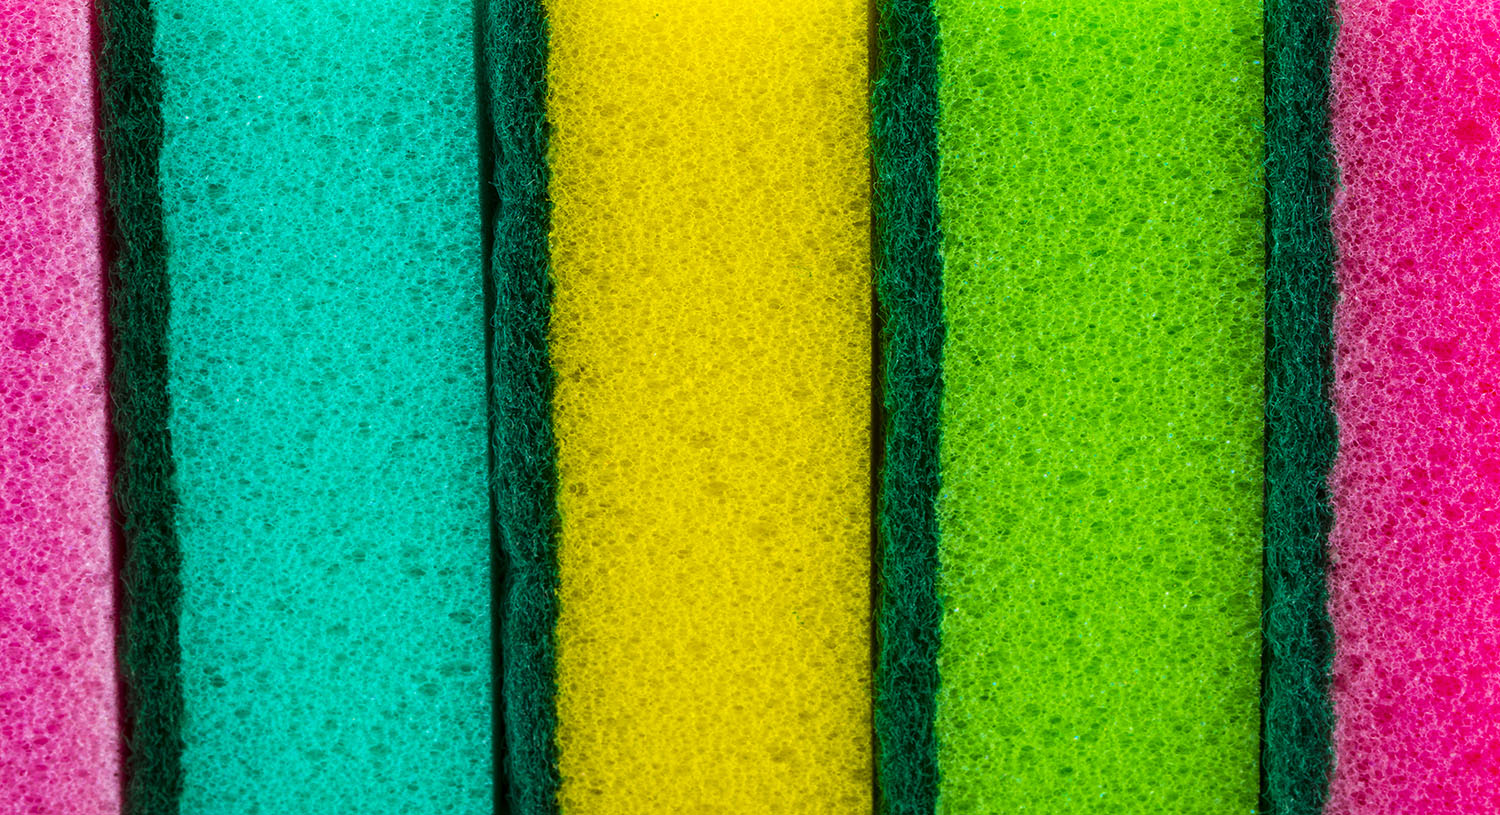 A closeup of a colorful sponges arranged vertically